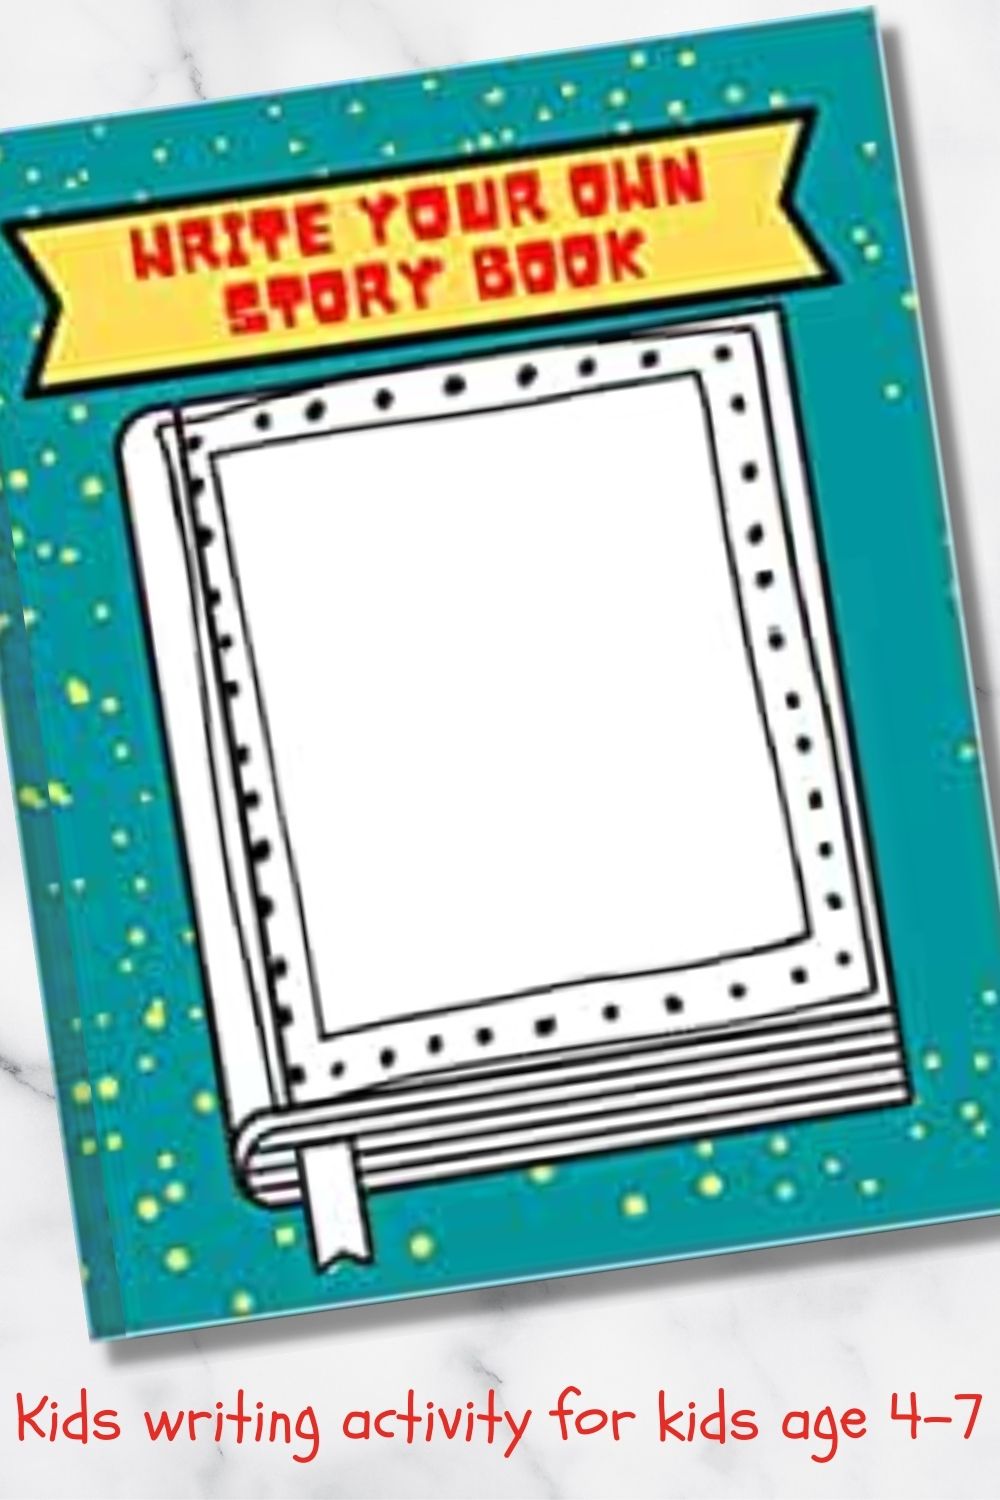 Write your own story book for kids age 4-7